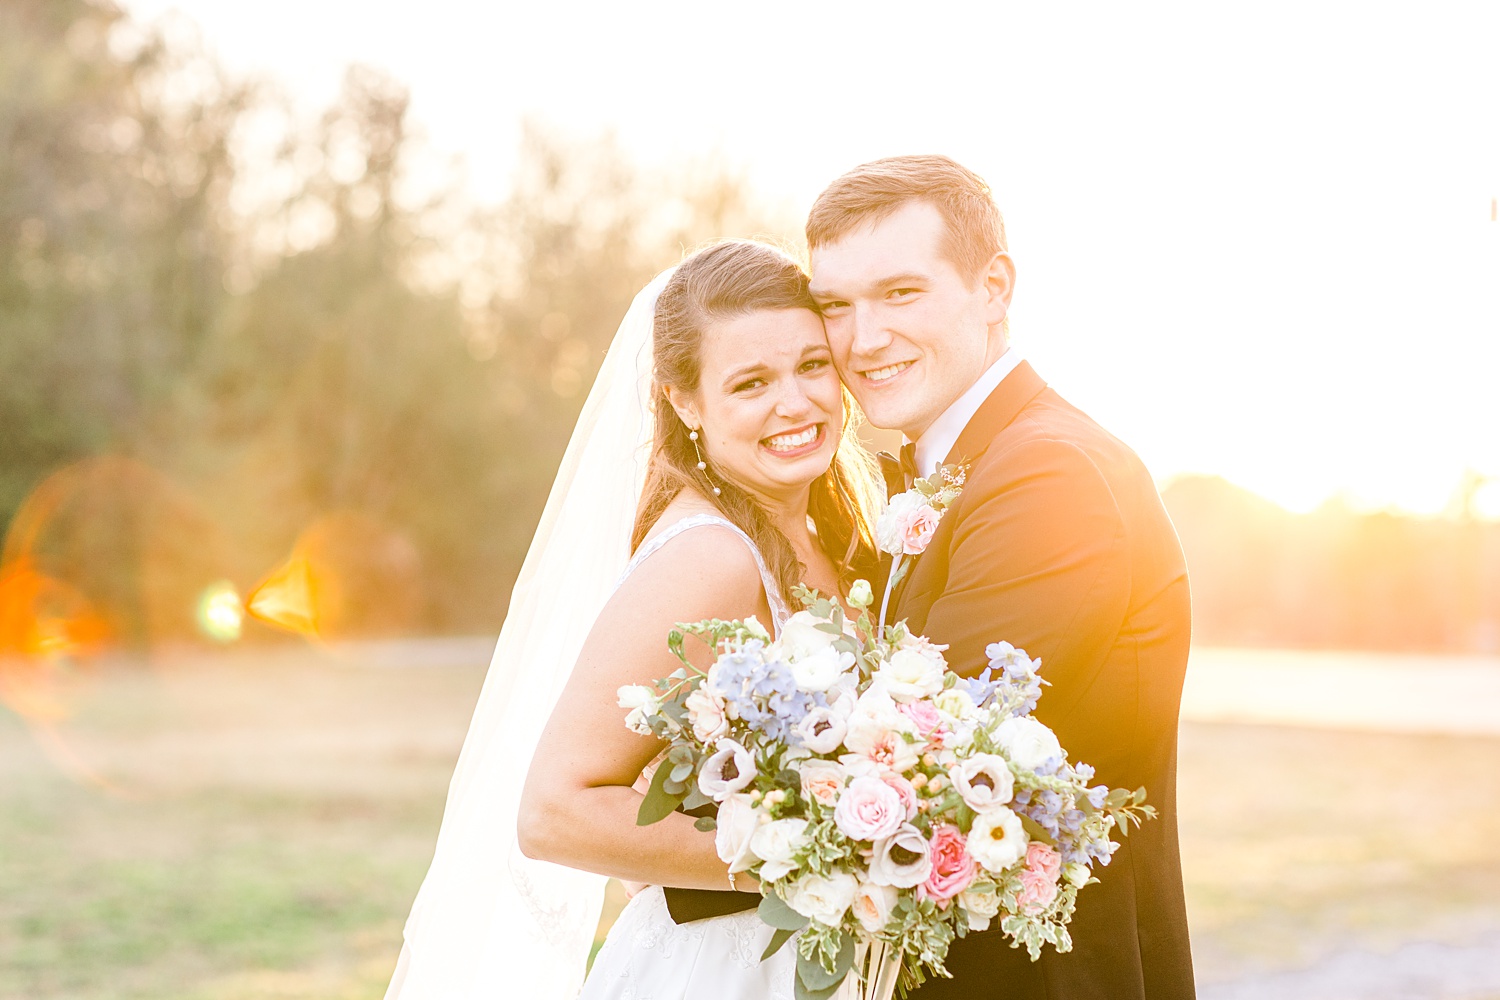 sunset wedding portraits of bride and groom in Birmingham AL -Birmingham AL Weddings of 2021